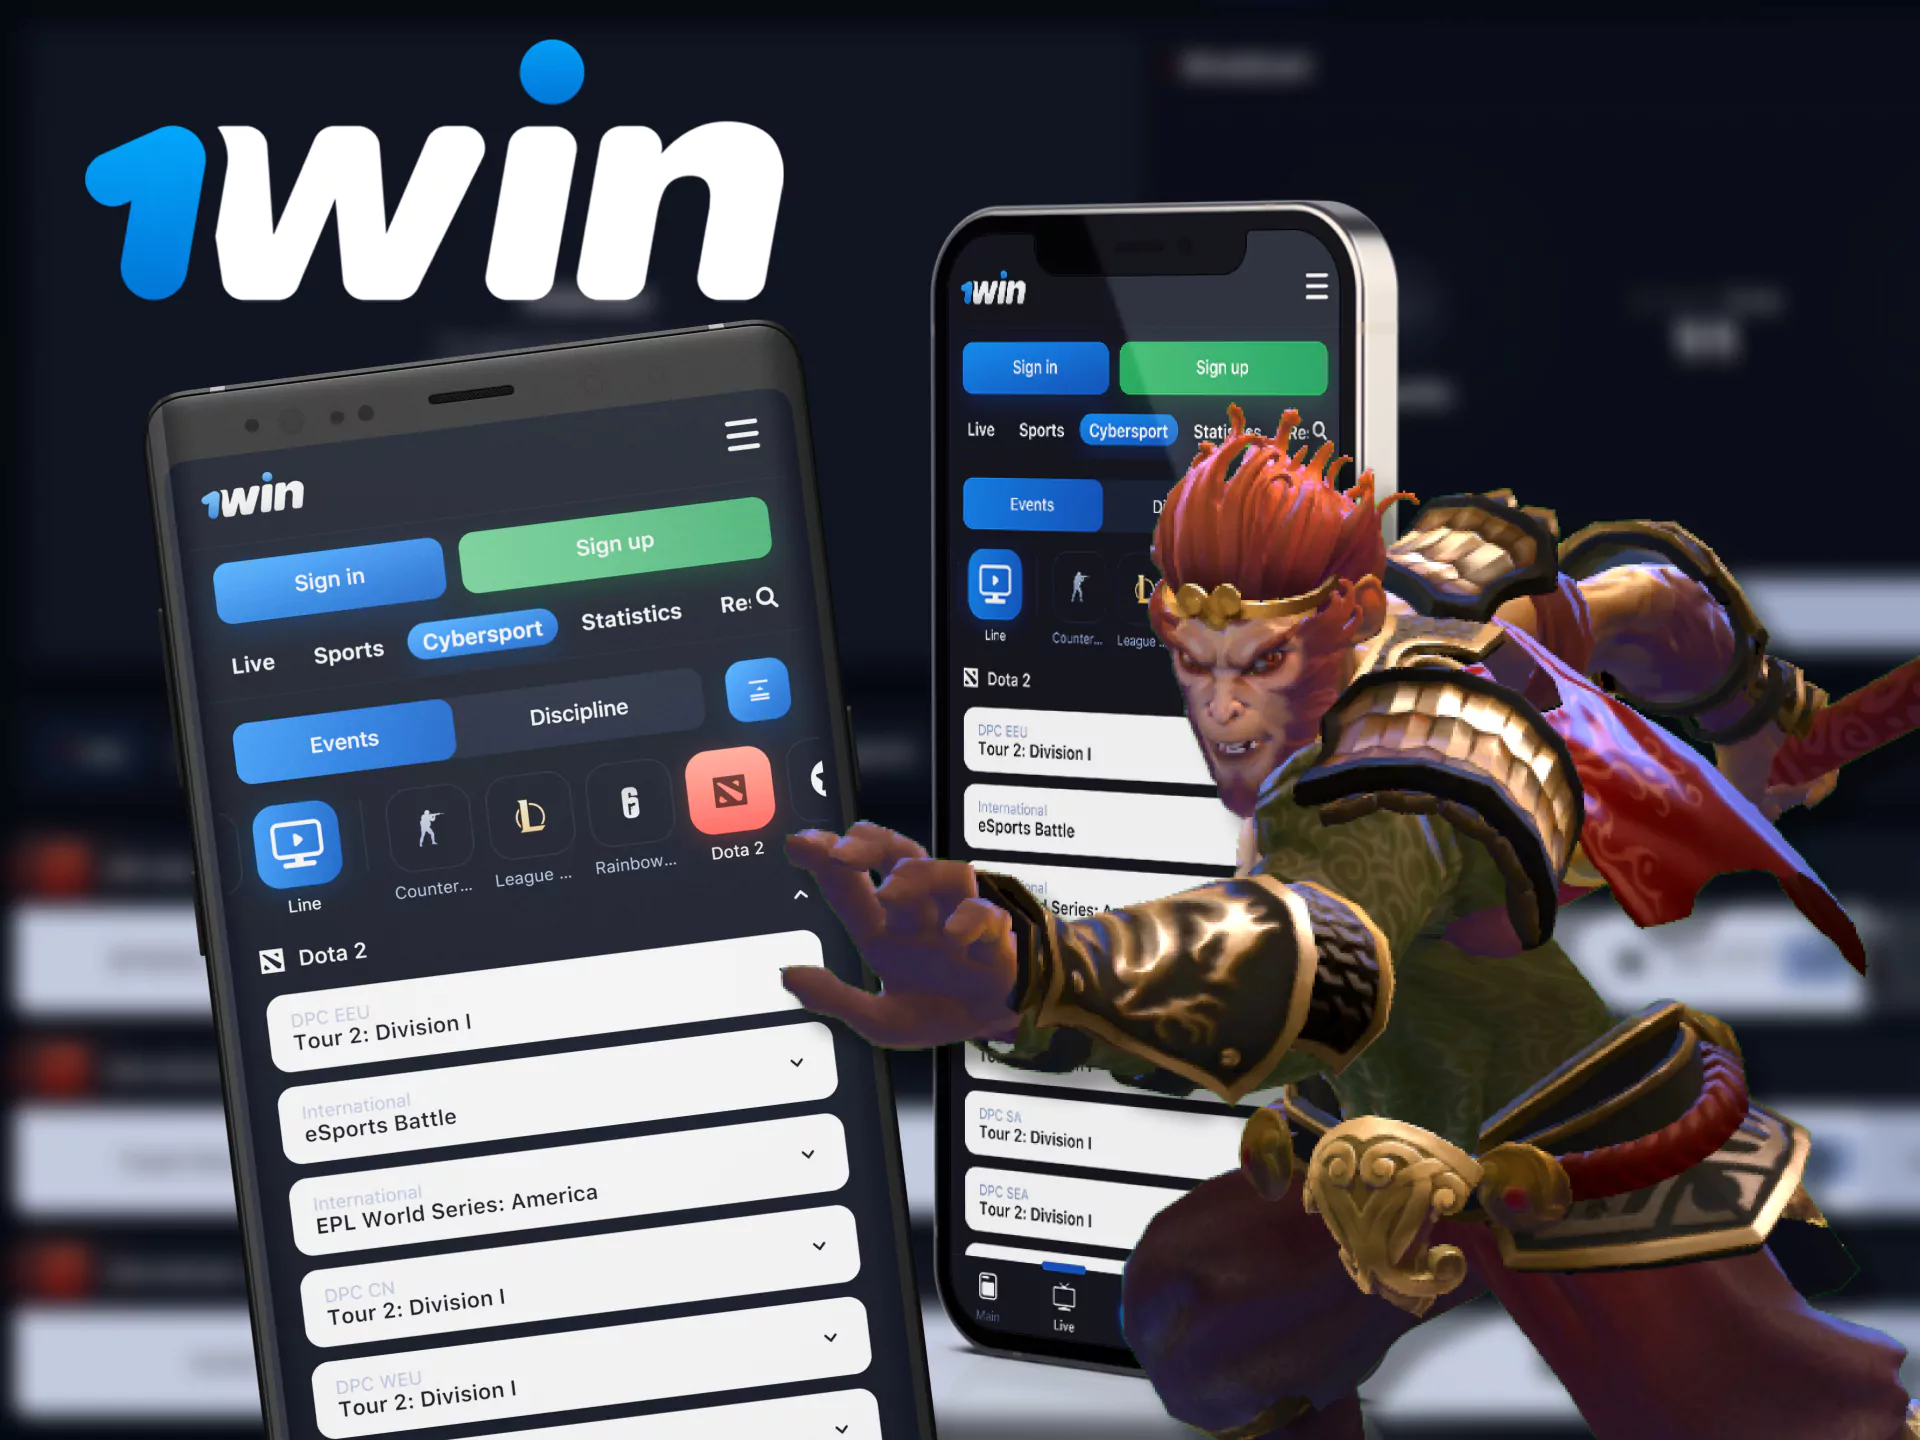 At 1Win, bet on DOTA 2 games from your phone through the app.